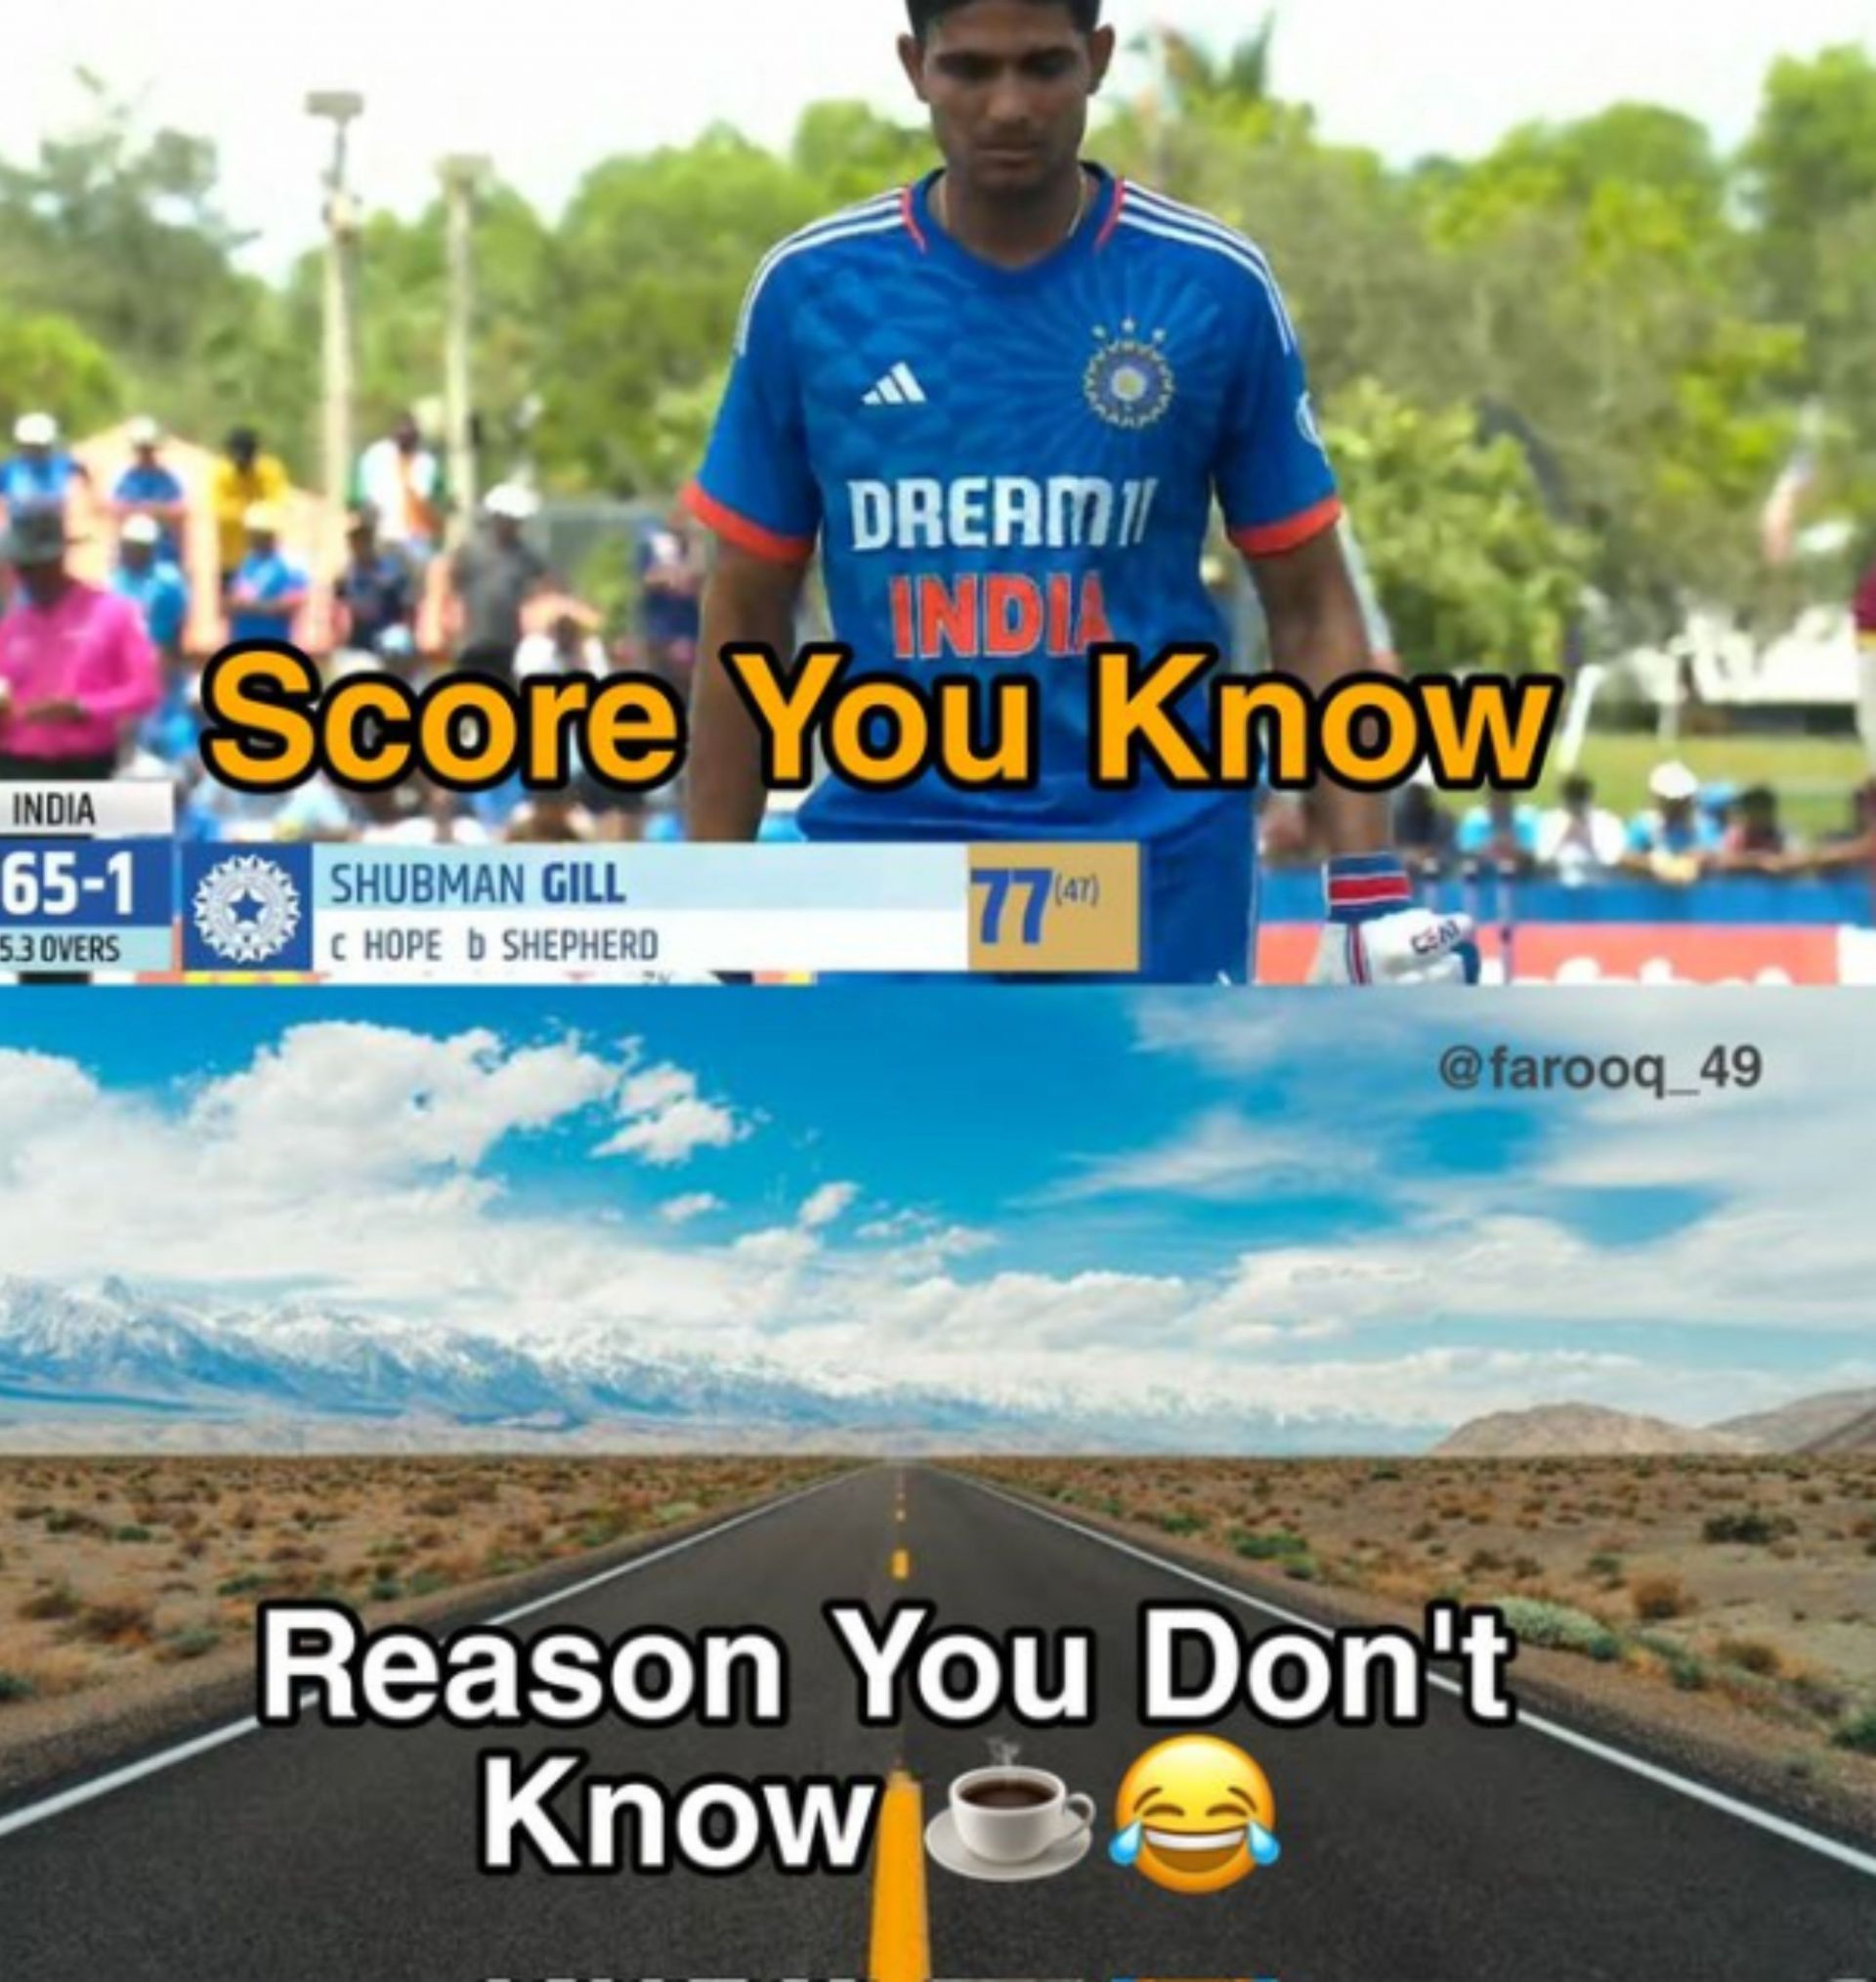 Meme shared by a fan after watching the 4th T20I India vs West Indies.